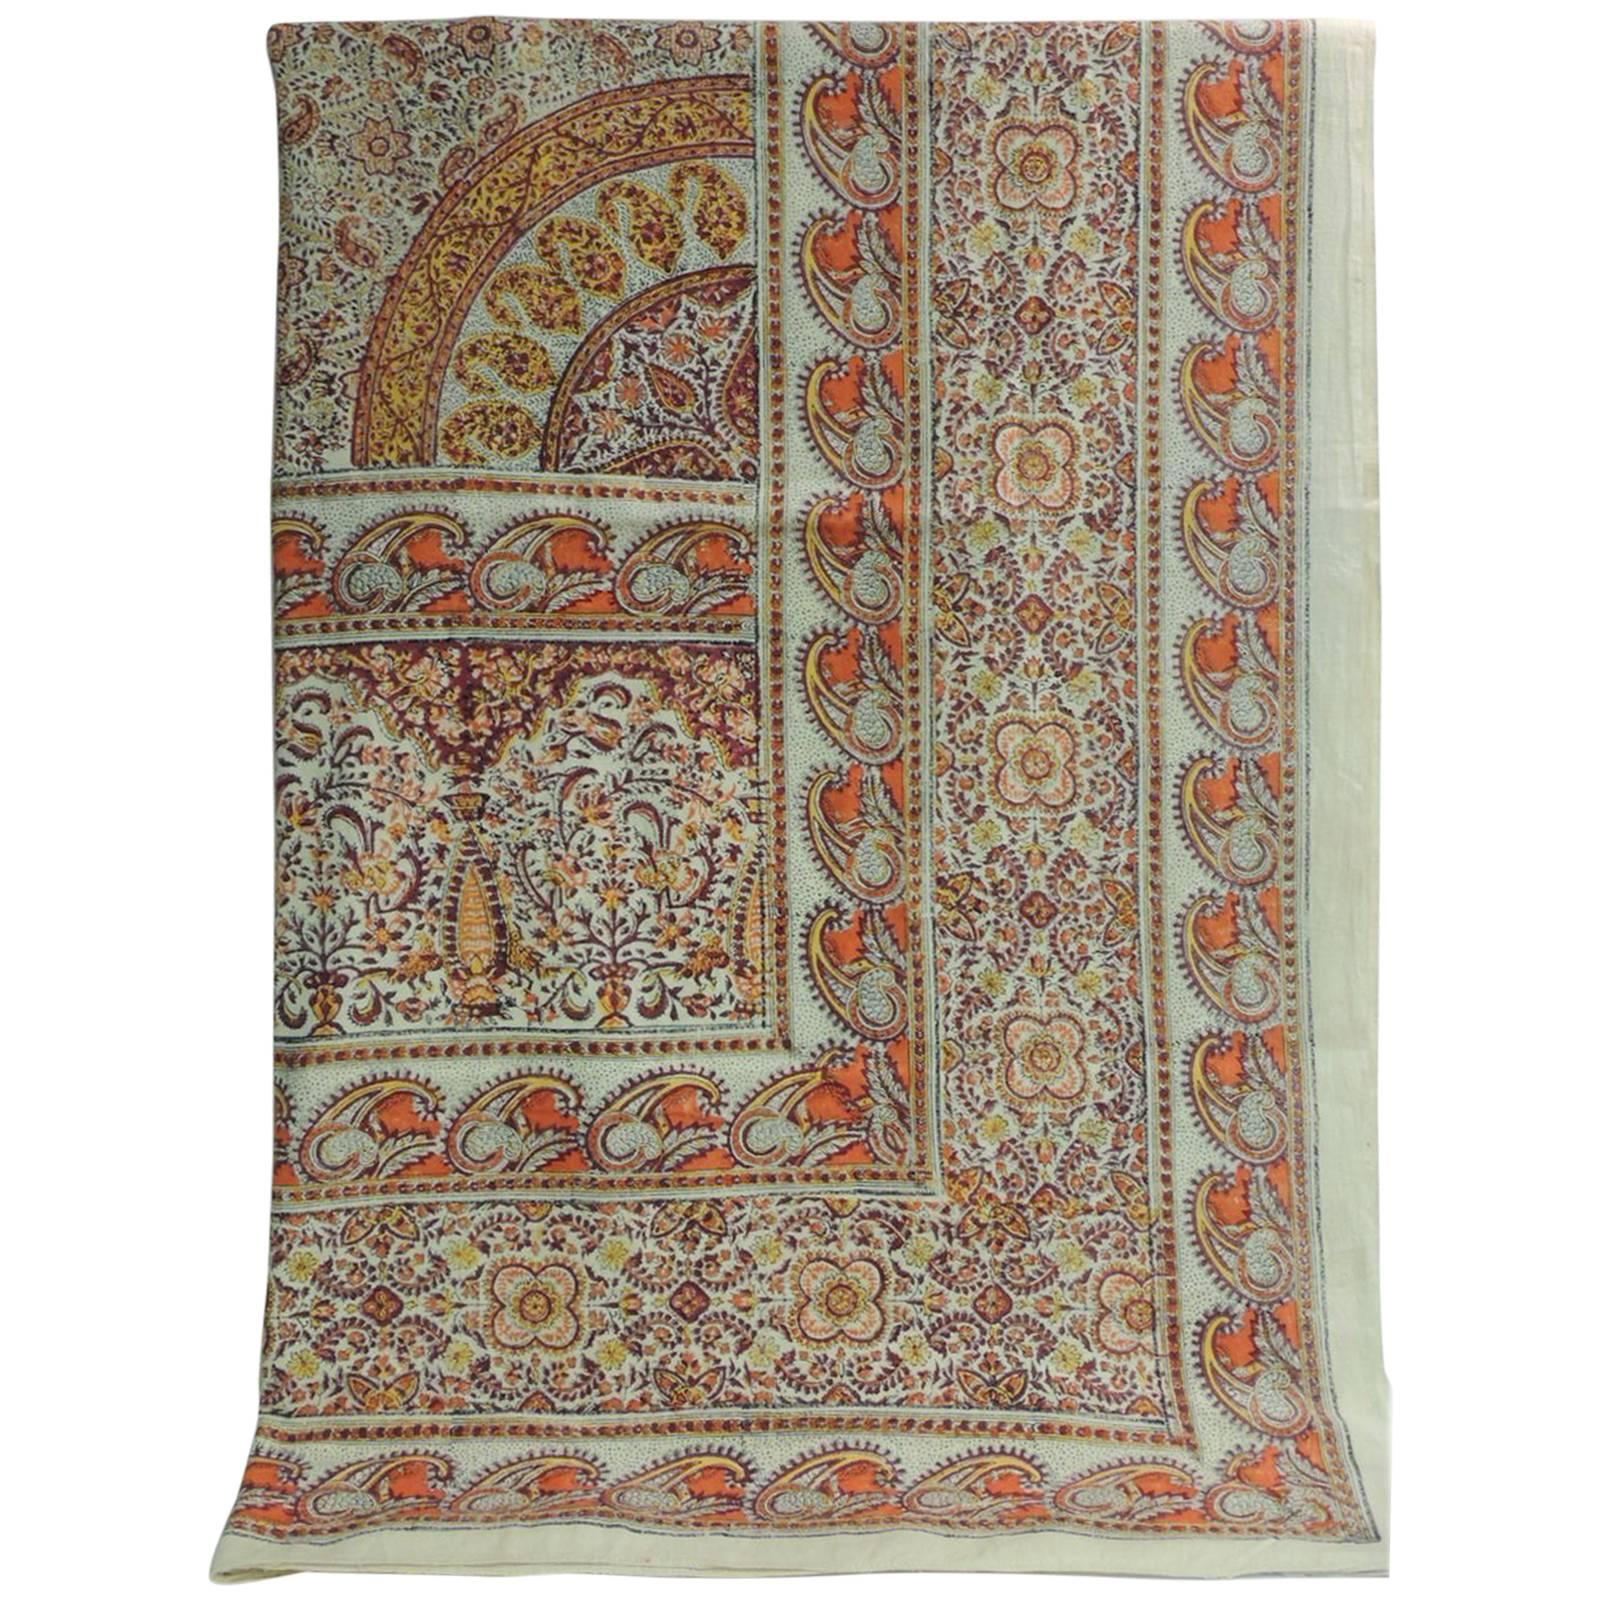 Vintage Orange and Yellow Hand-Blocked Indian Cloth